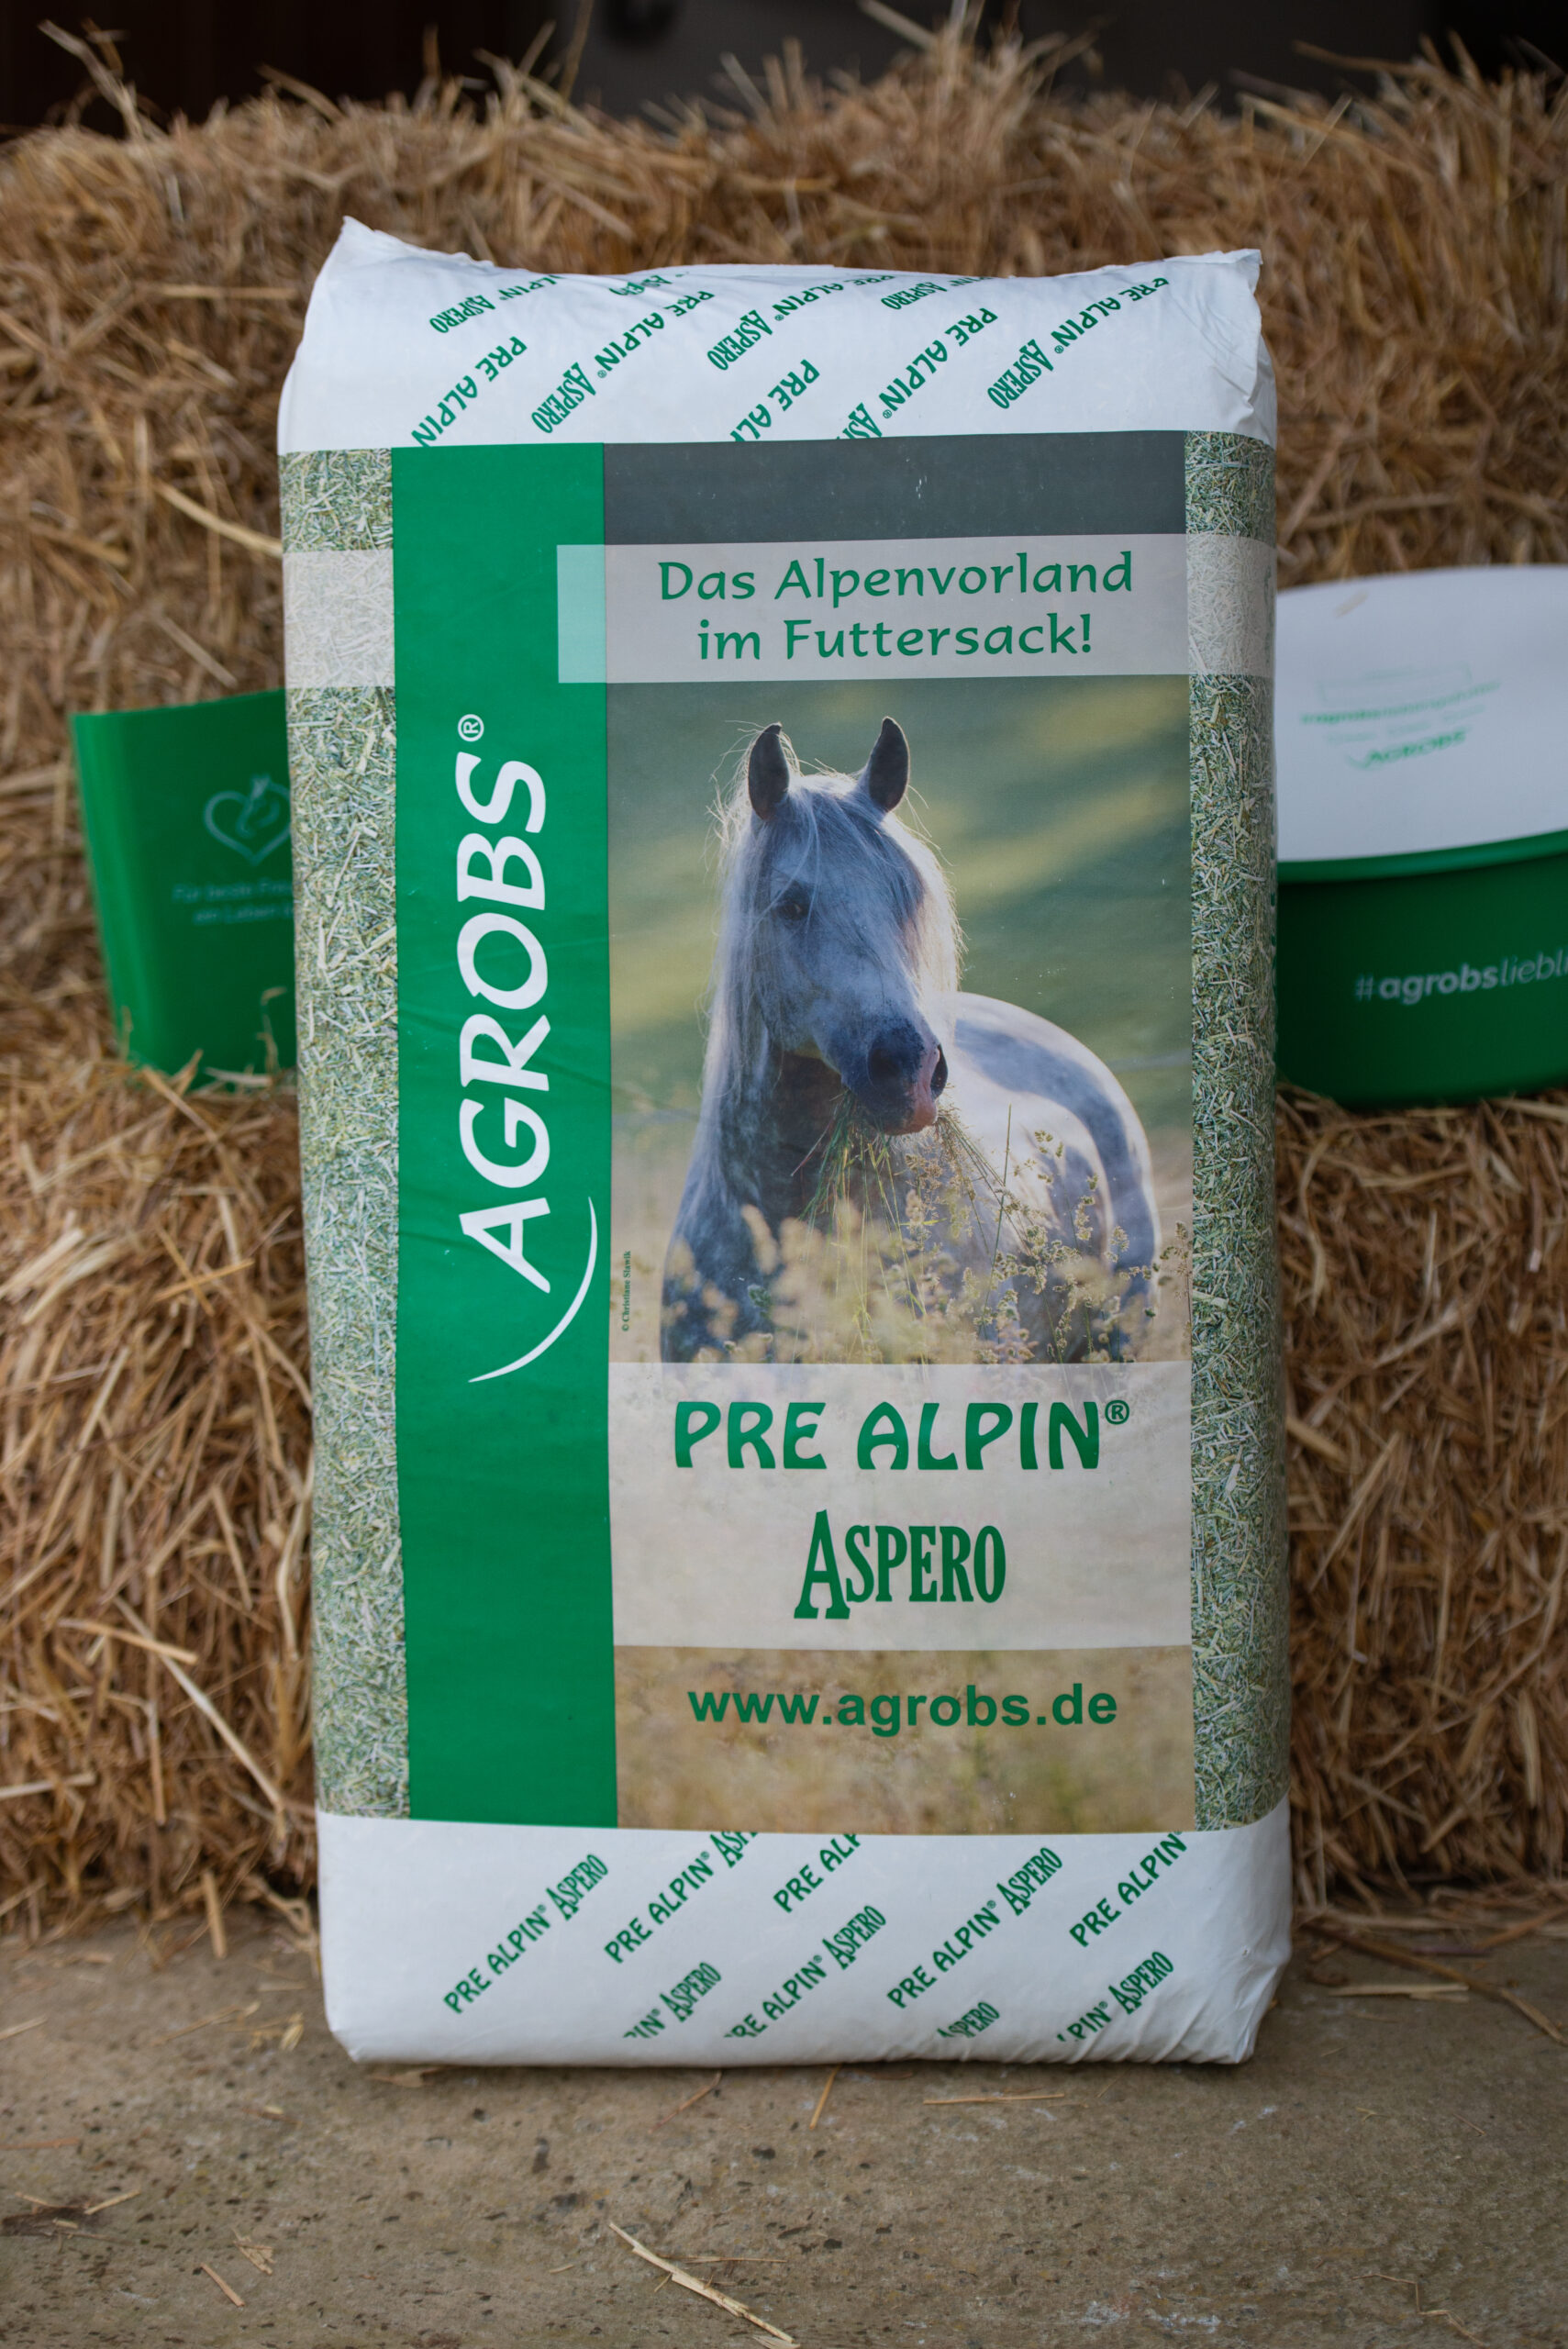 Product shot of the packaged bale of Agrobs Pre Alpin Aspero